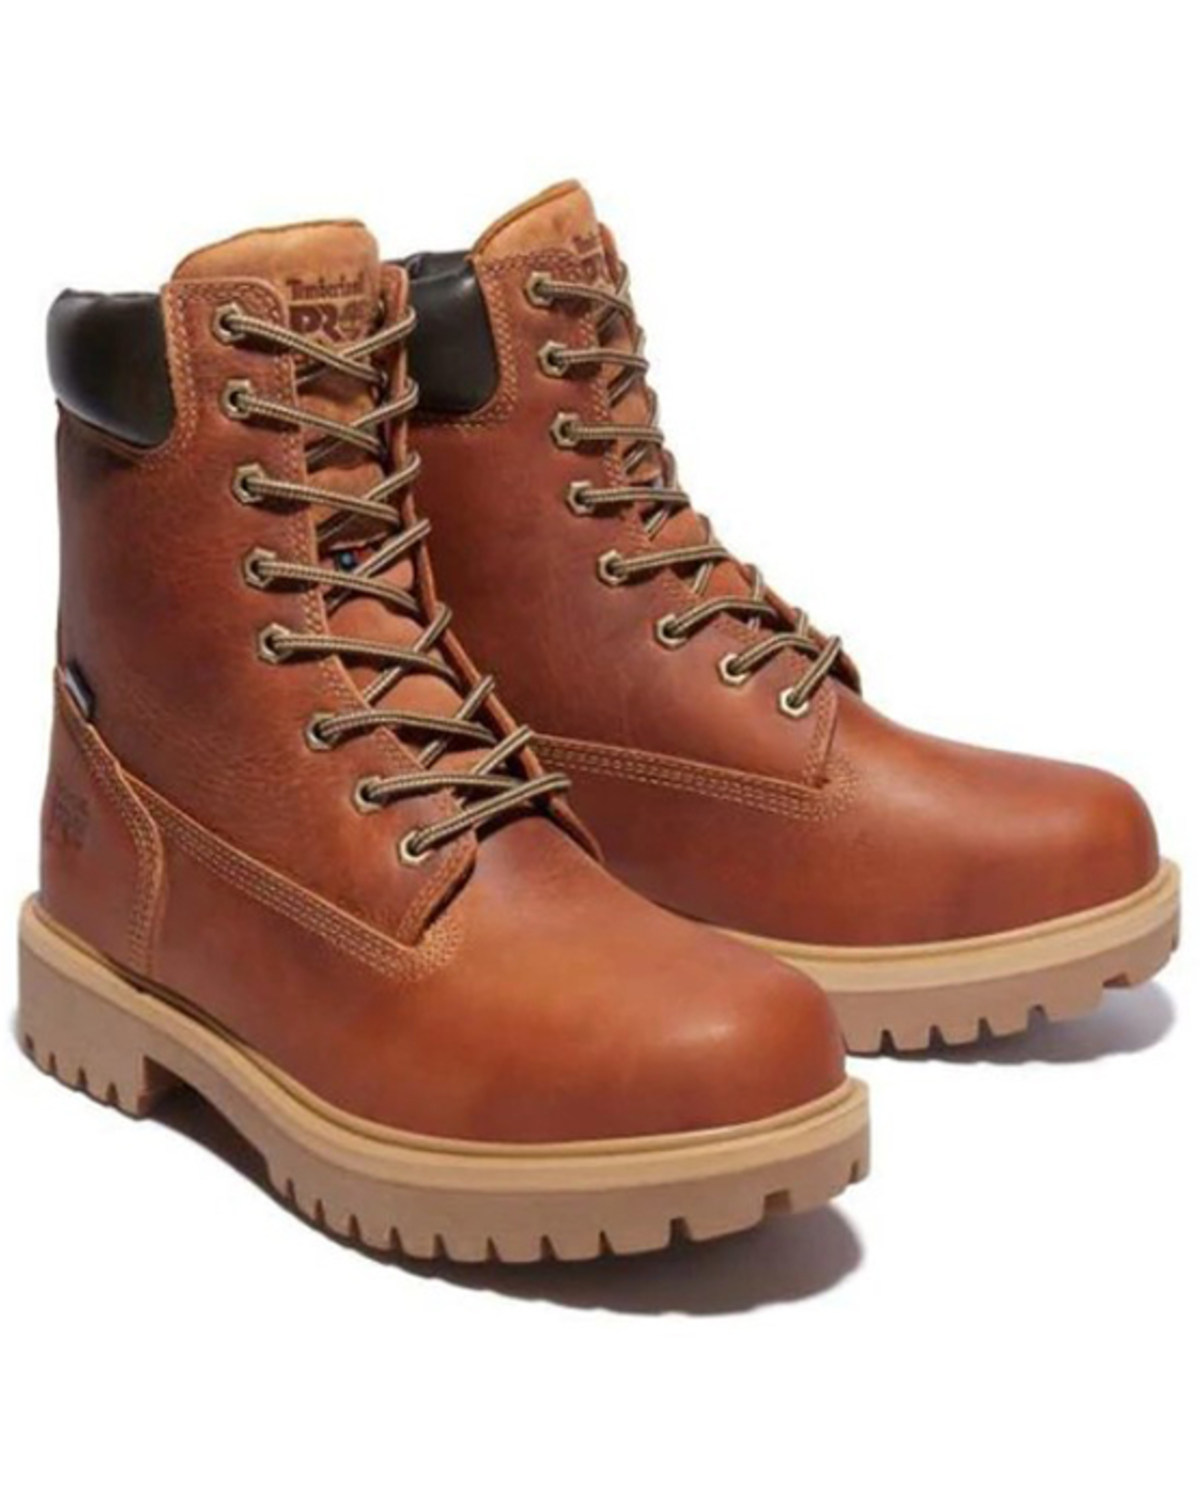 Timberland Men's Direct Attach Marigold Nutbuck 8" Lace-Up Waterproof Work Boots - Round Toe